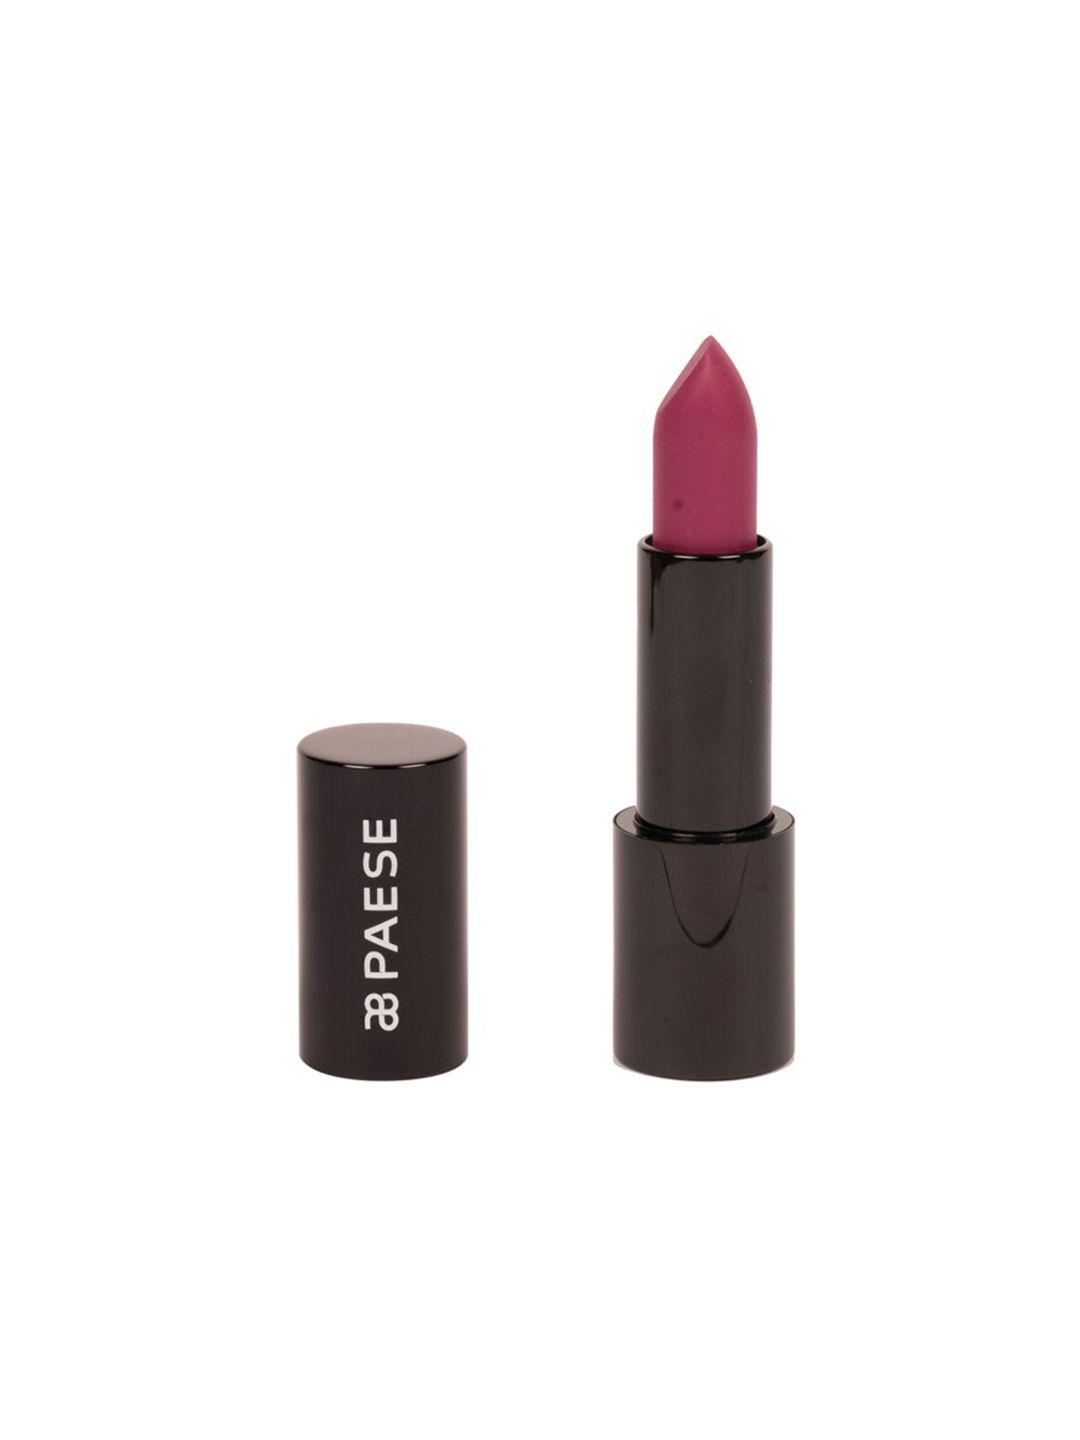 Paese Cosmetics Mattologie Matte Lipstick with Rice Oil 4.3 g - Rebel 101 Price in India